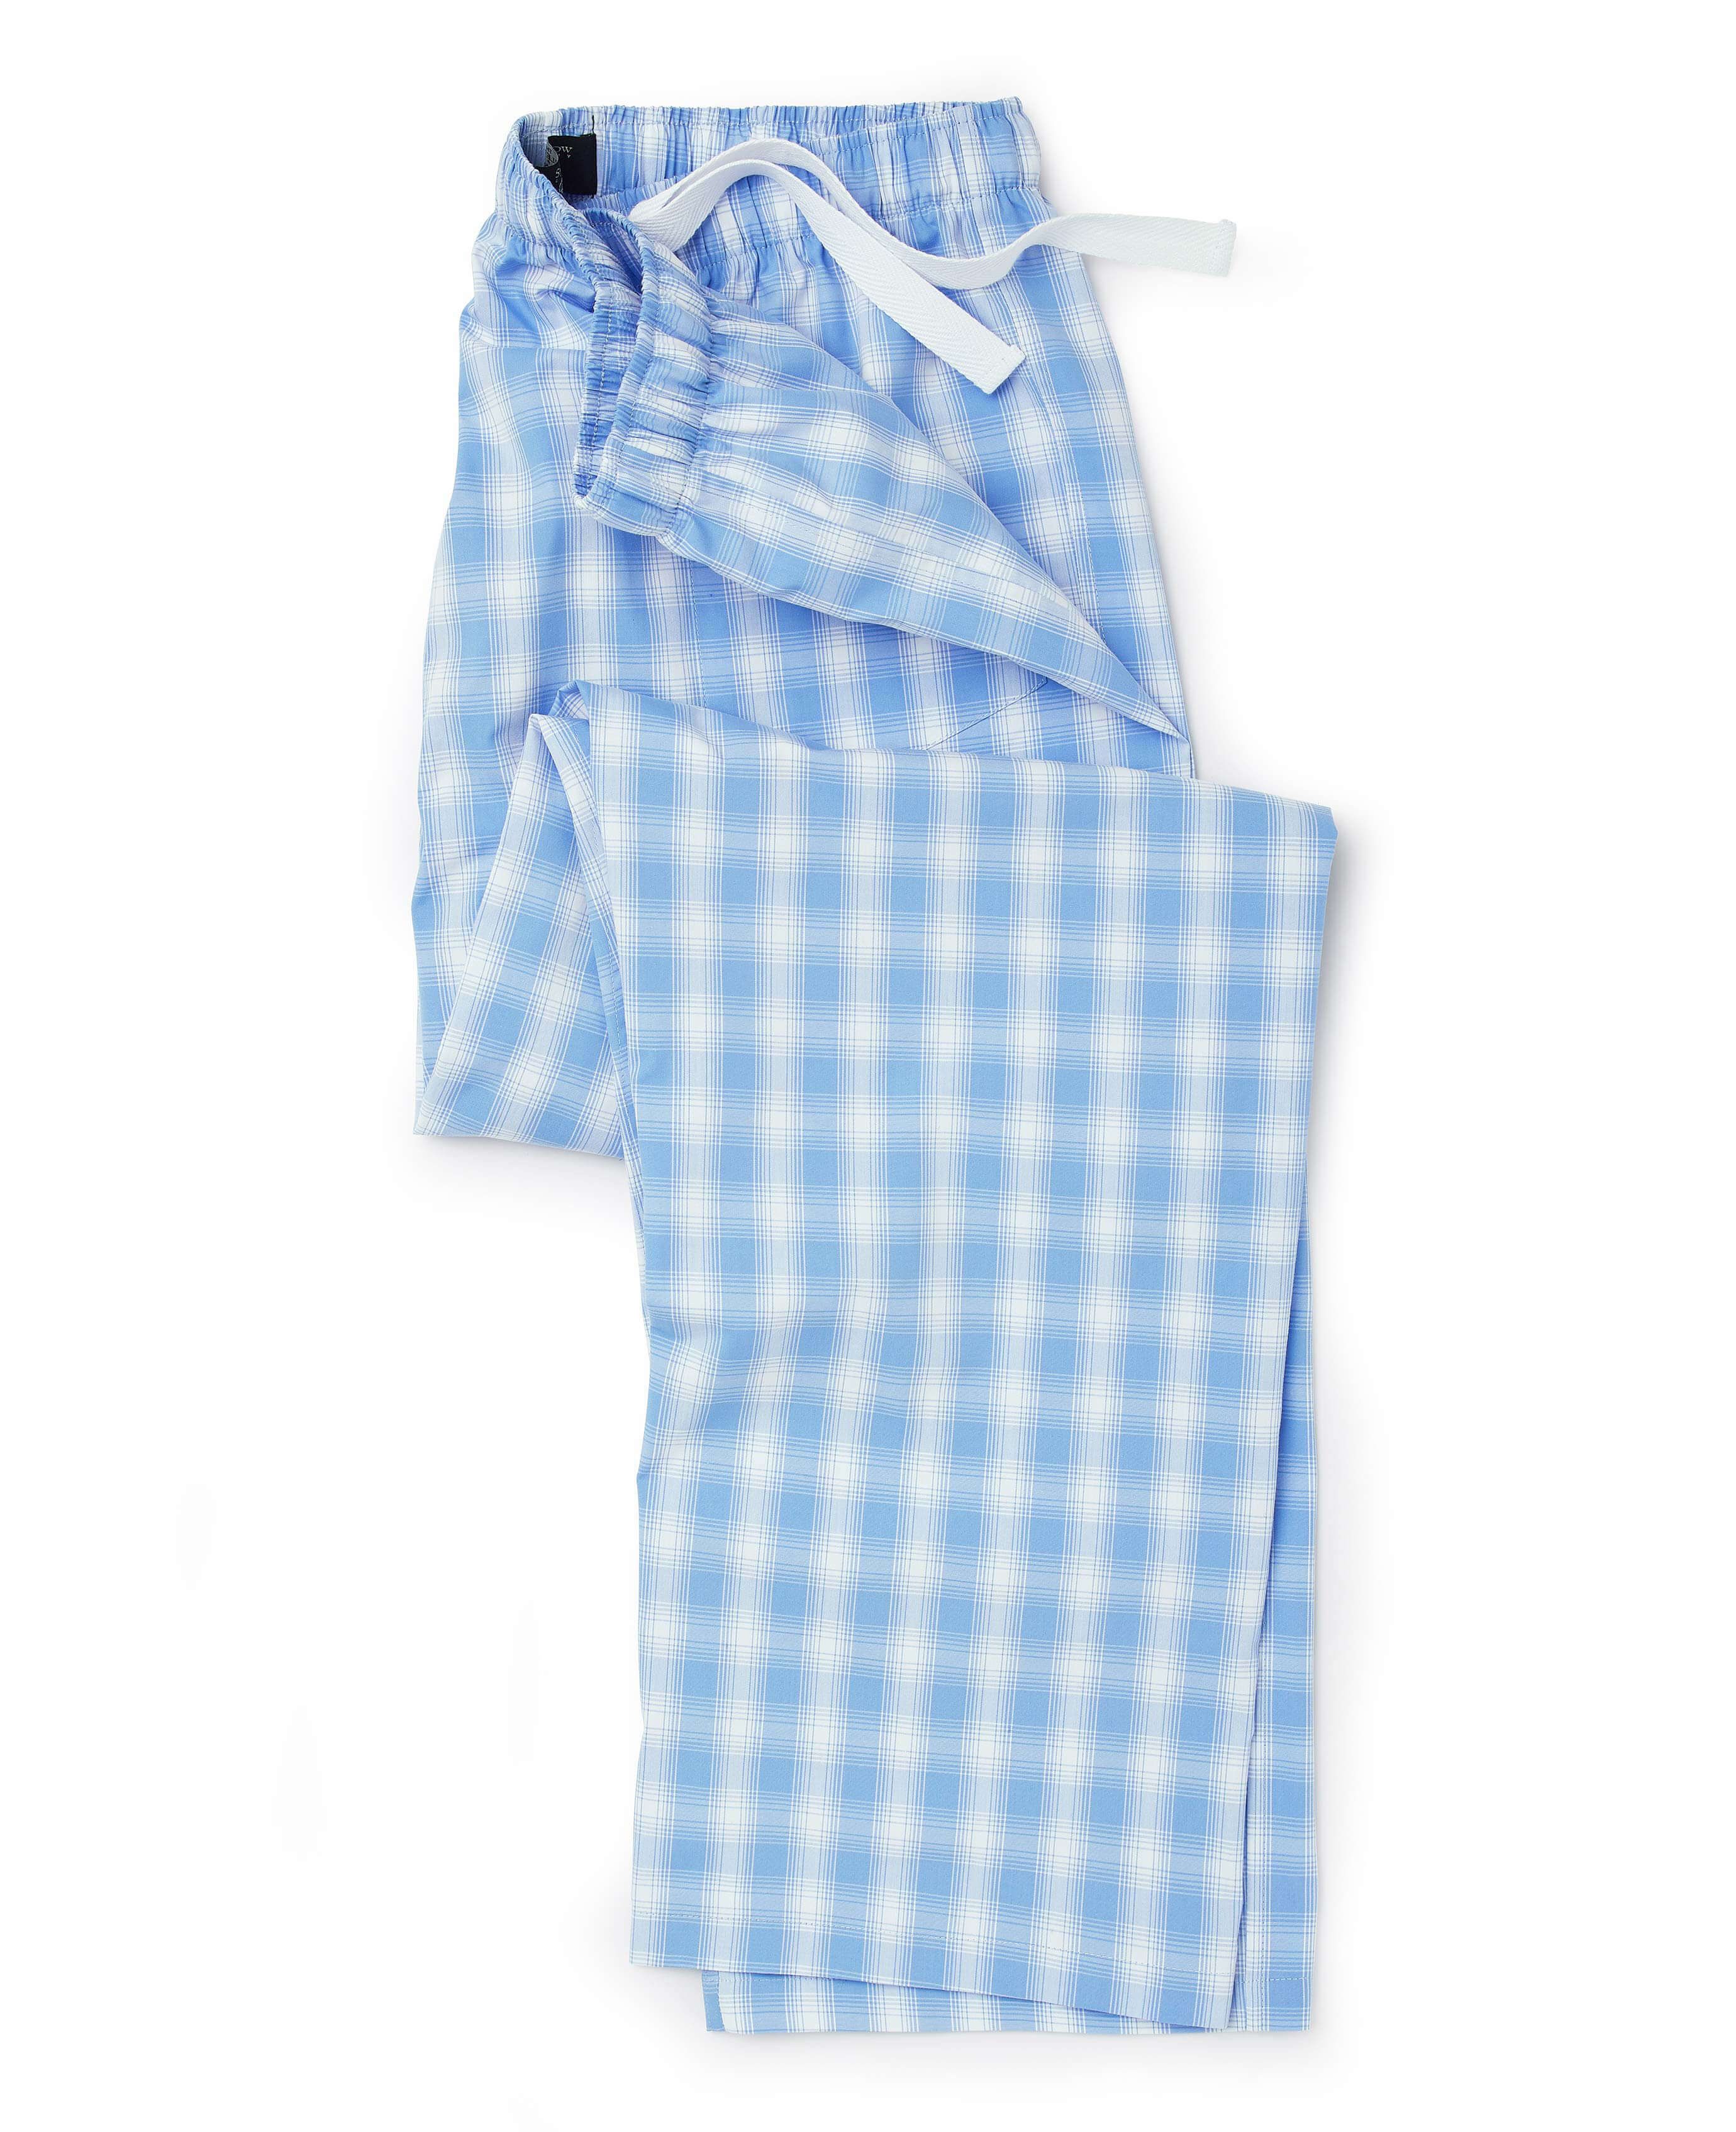 Men's luxury blue and white check cotton lounge pants